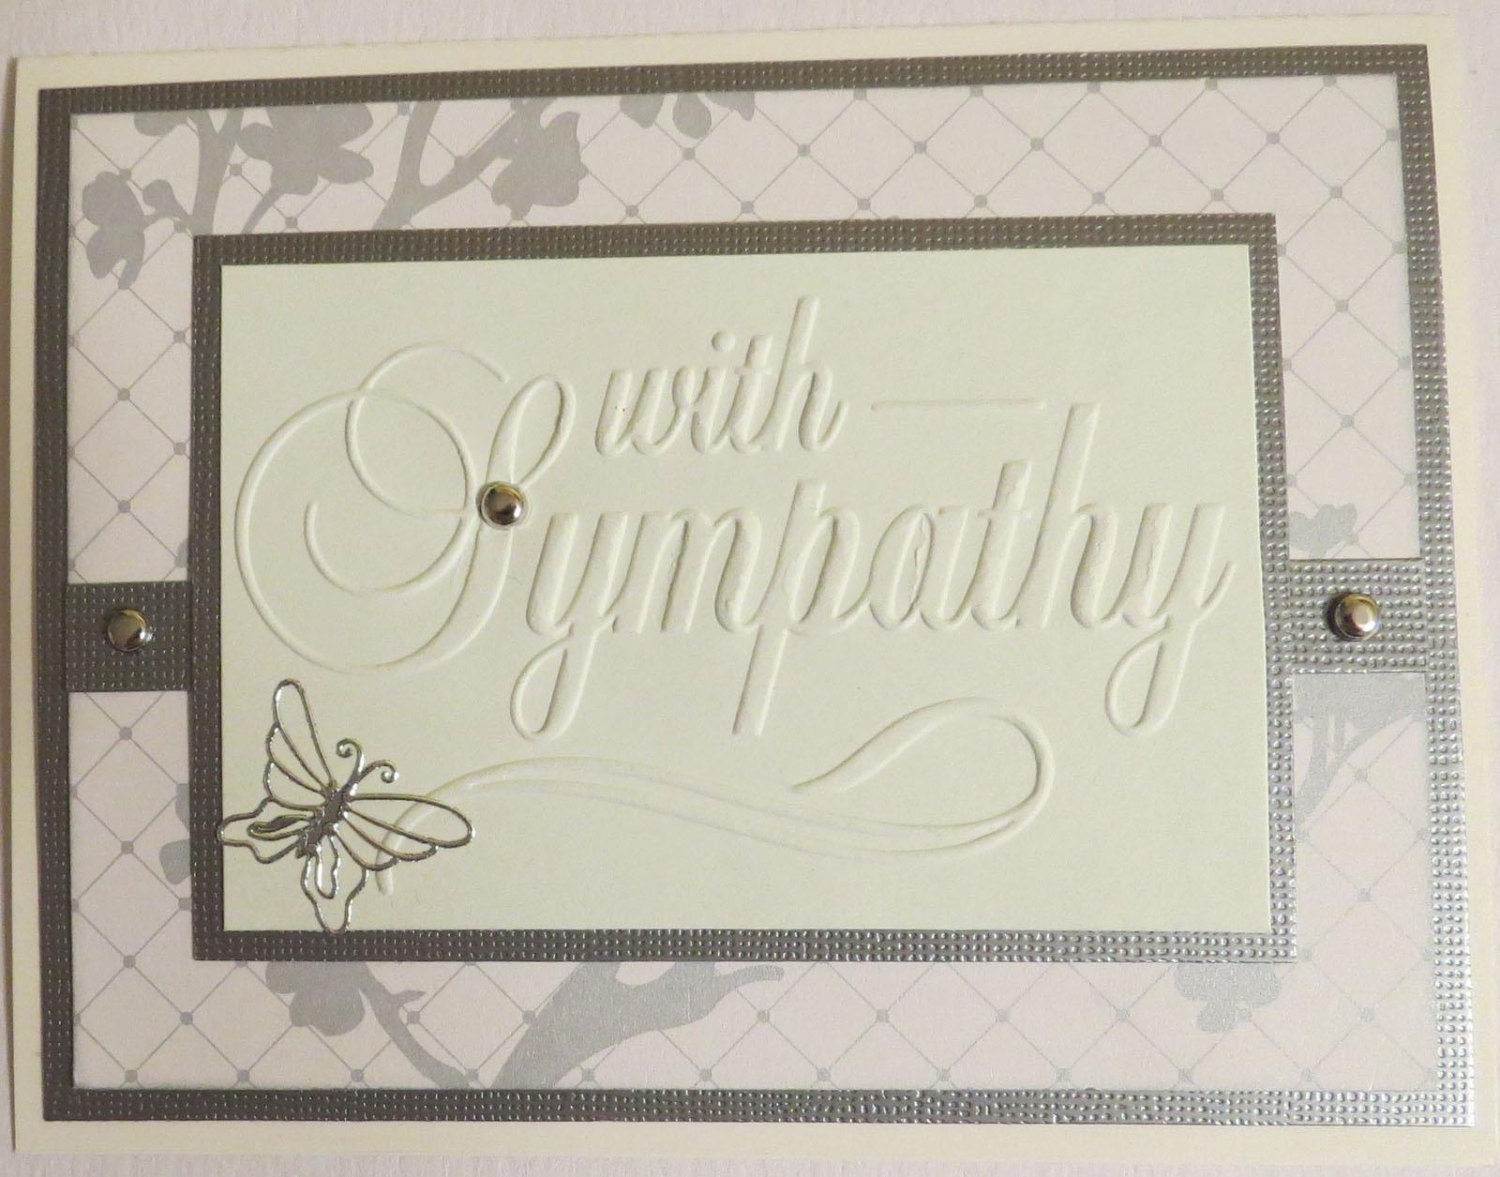 Darice A2 Embossing Folder With Sympathy 1218-121 from ClearbagsRUs on ...